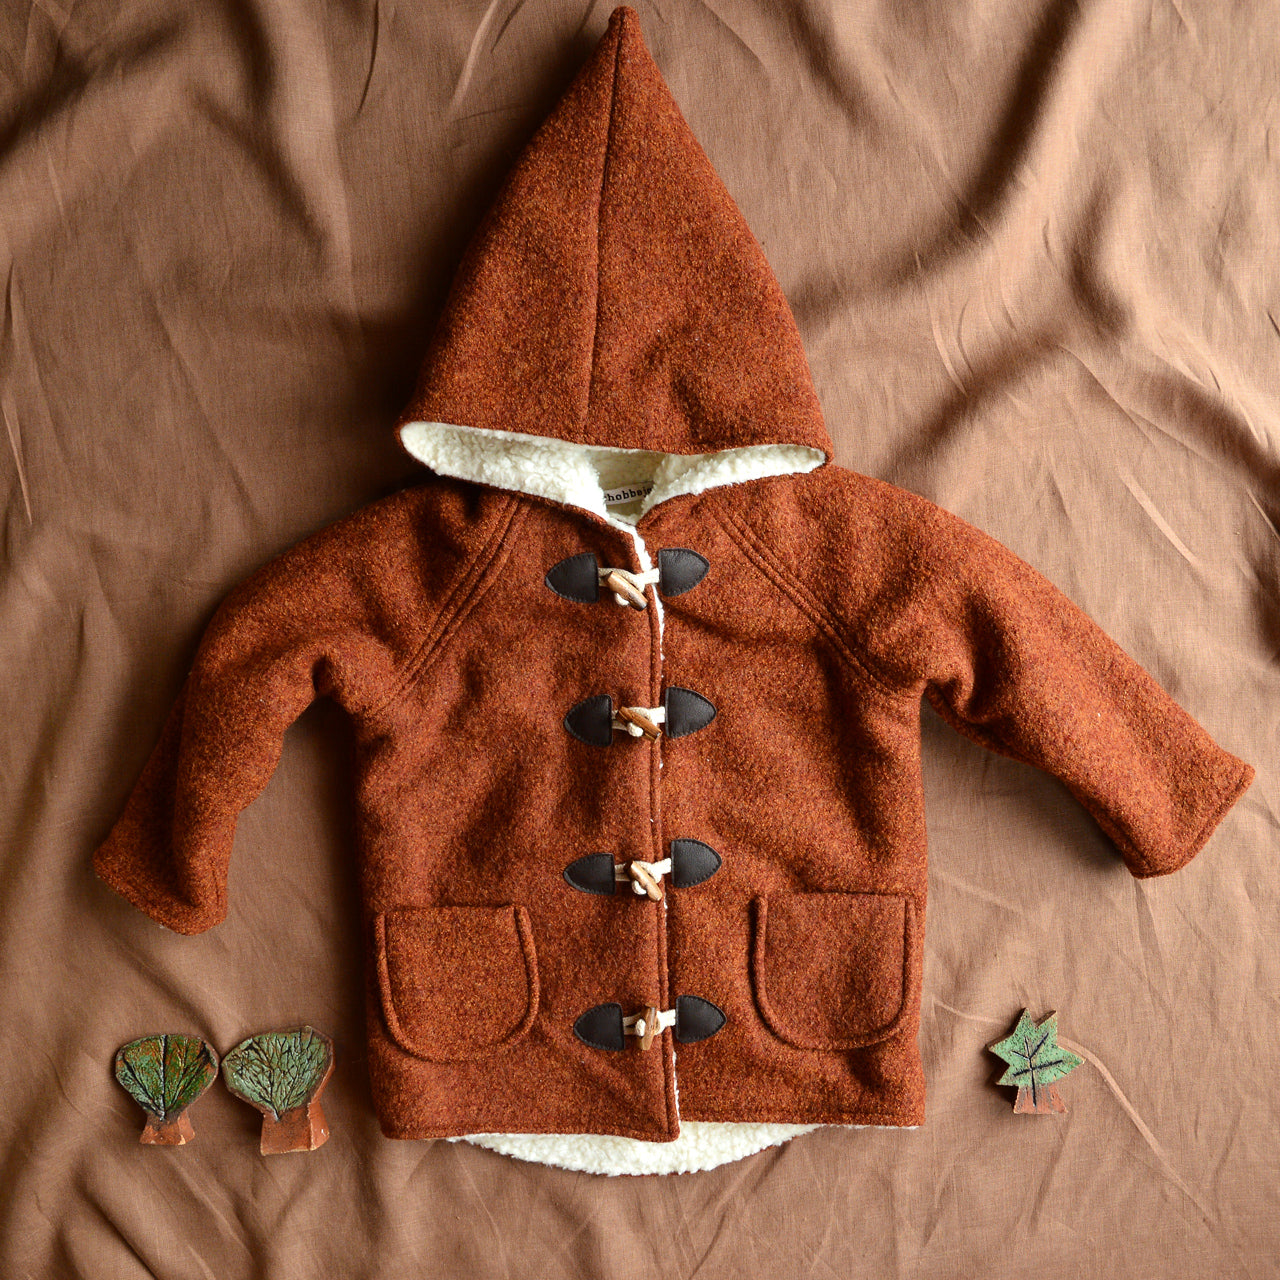 Winter Wool Coat with Pixie Hood -  Autumn Leaves (2-3y) *Last One!